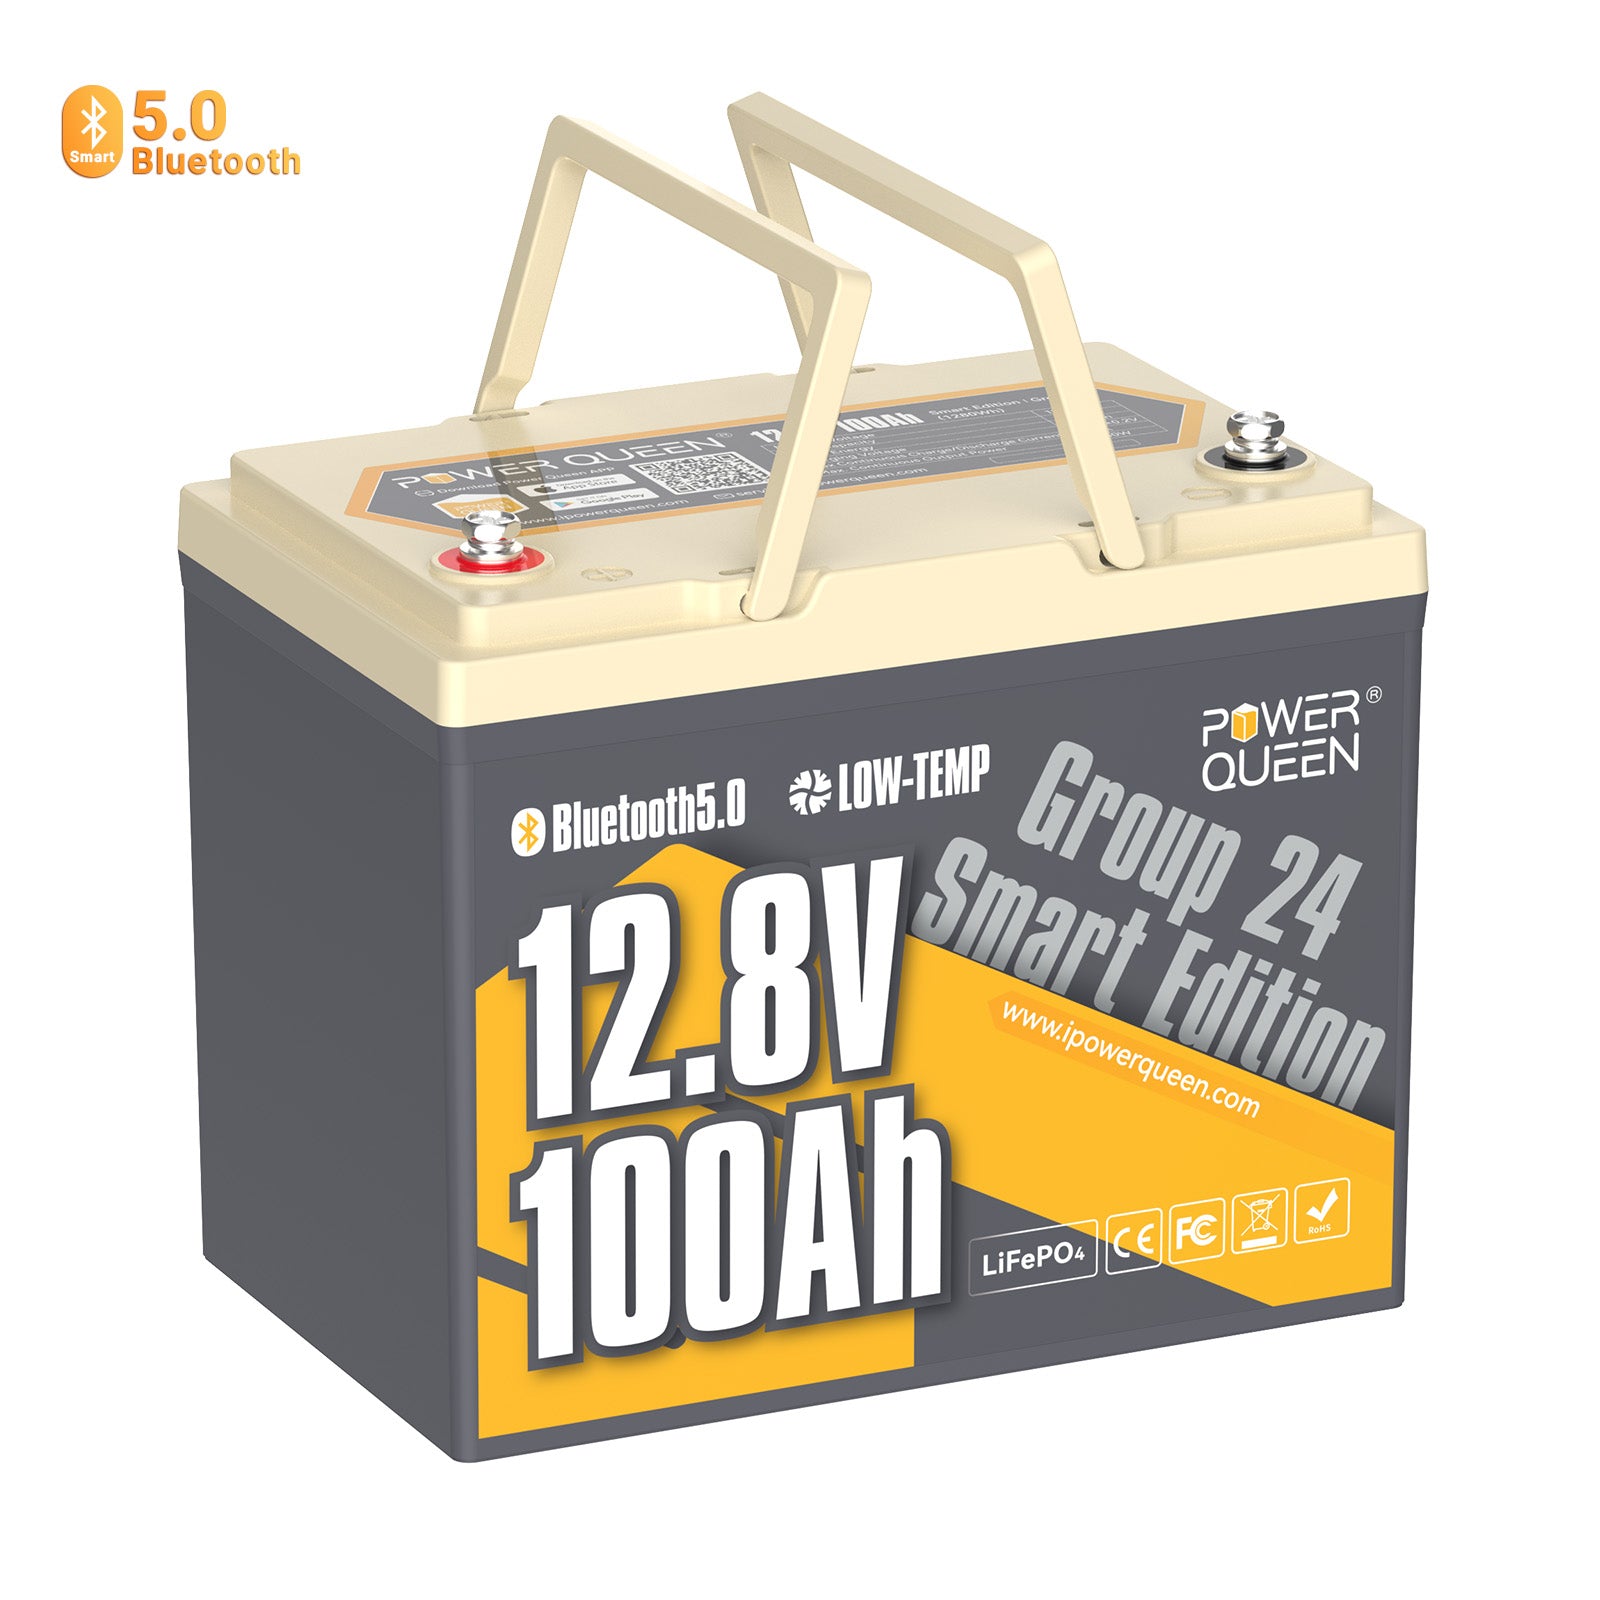 Power Queen 12V 100Ah Group 24 Smart LiFePO4 Battery with Bluetooth